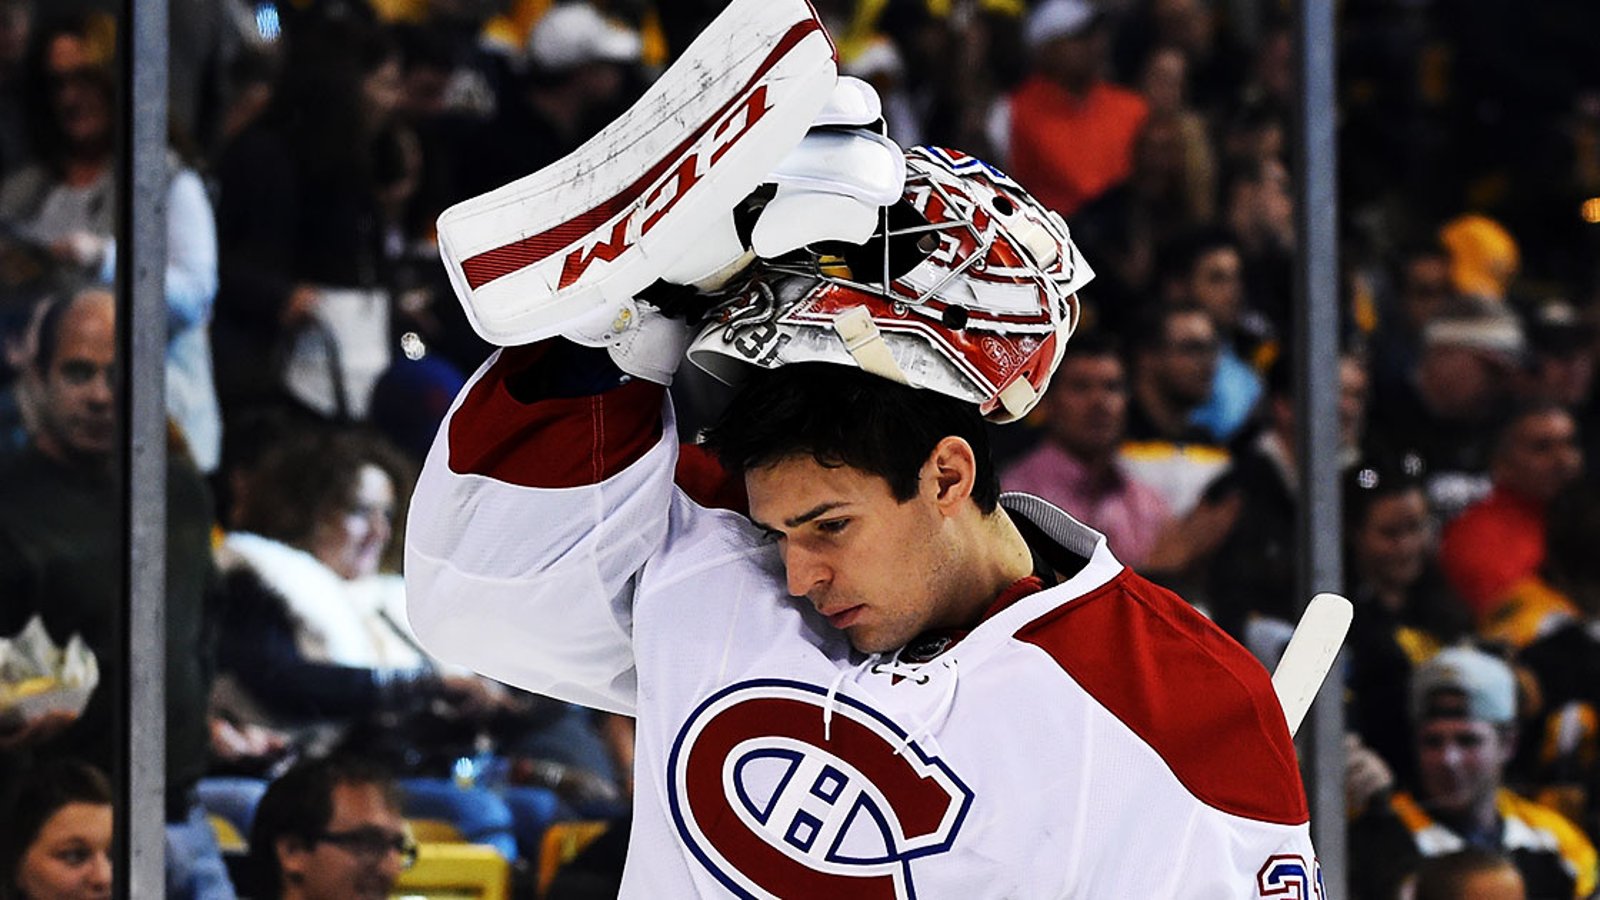 Precursor signs of Carey Price being traded?!?!